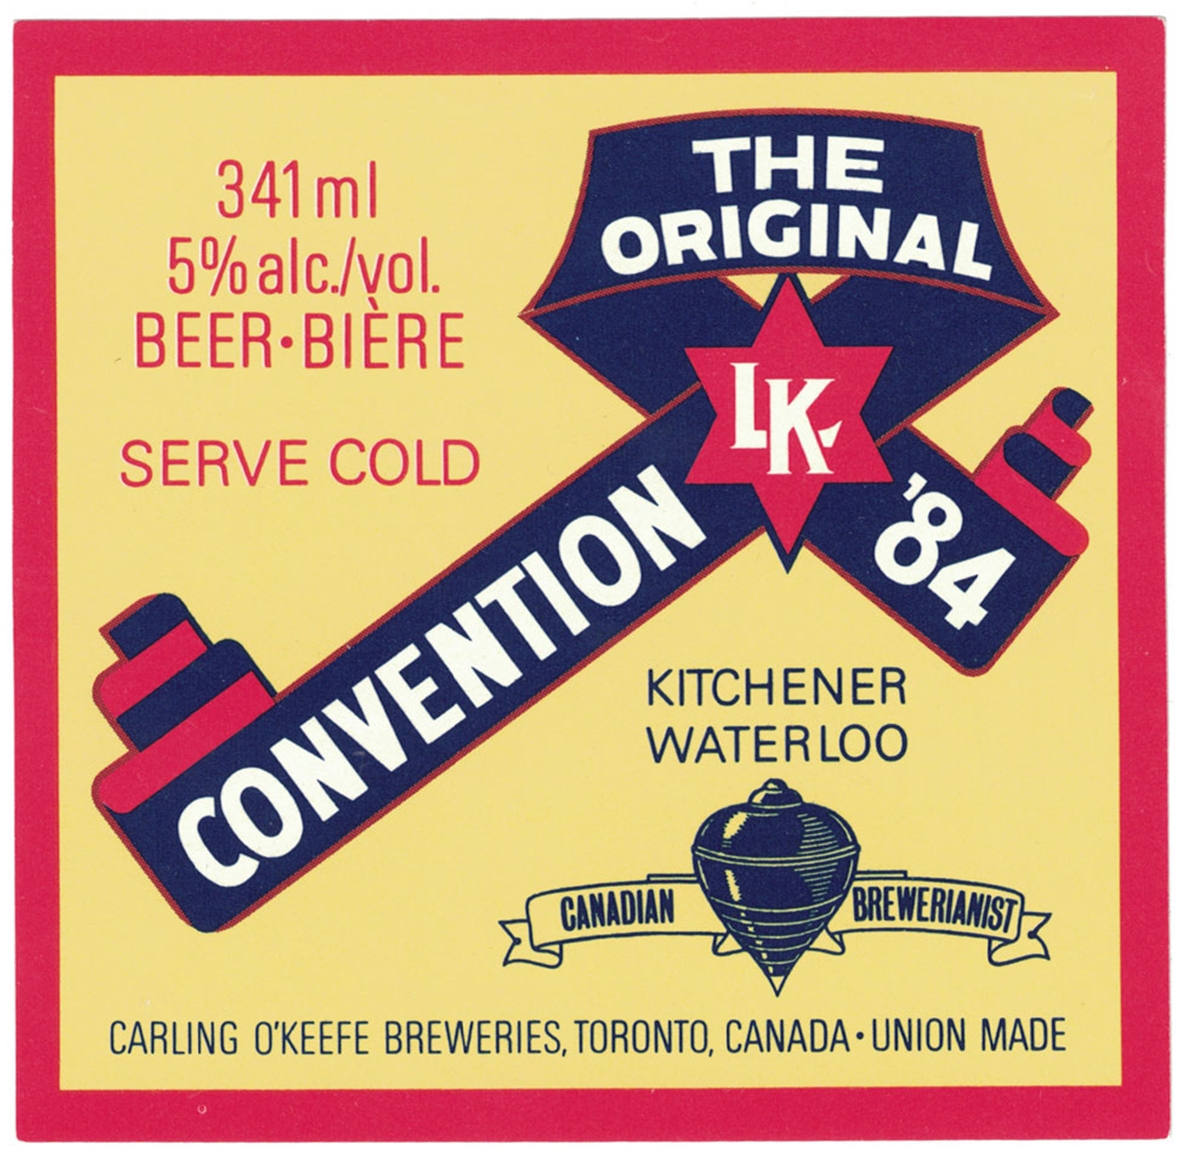 Convention '84 Beer Label